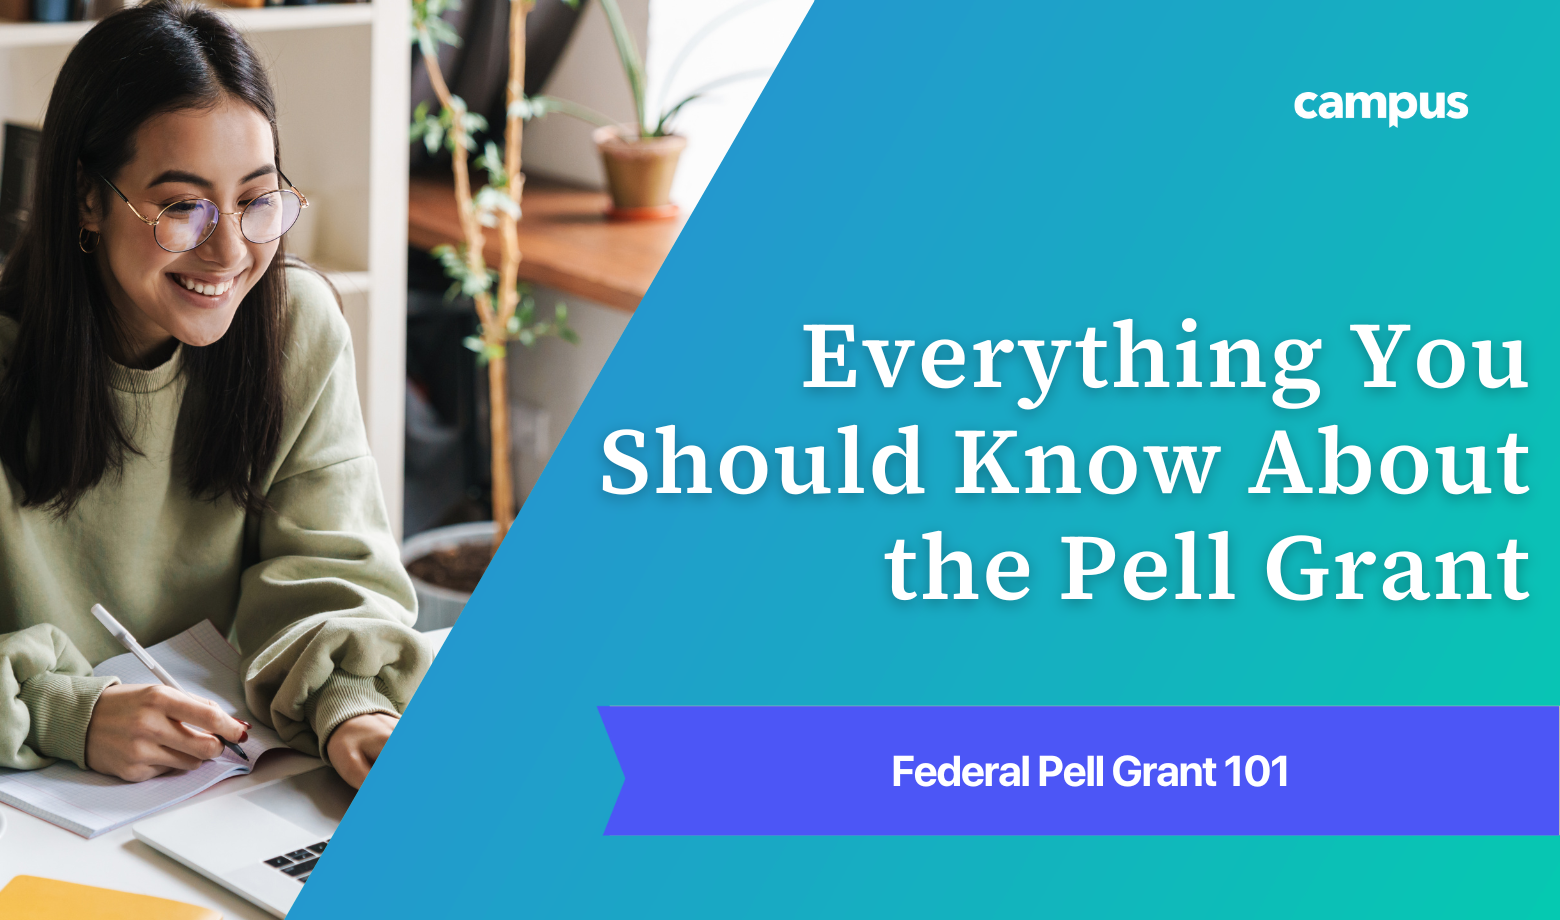 Am I Eligible for a Pell Grant?